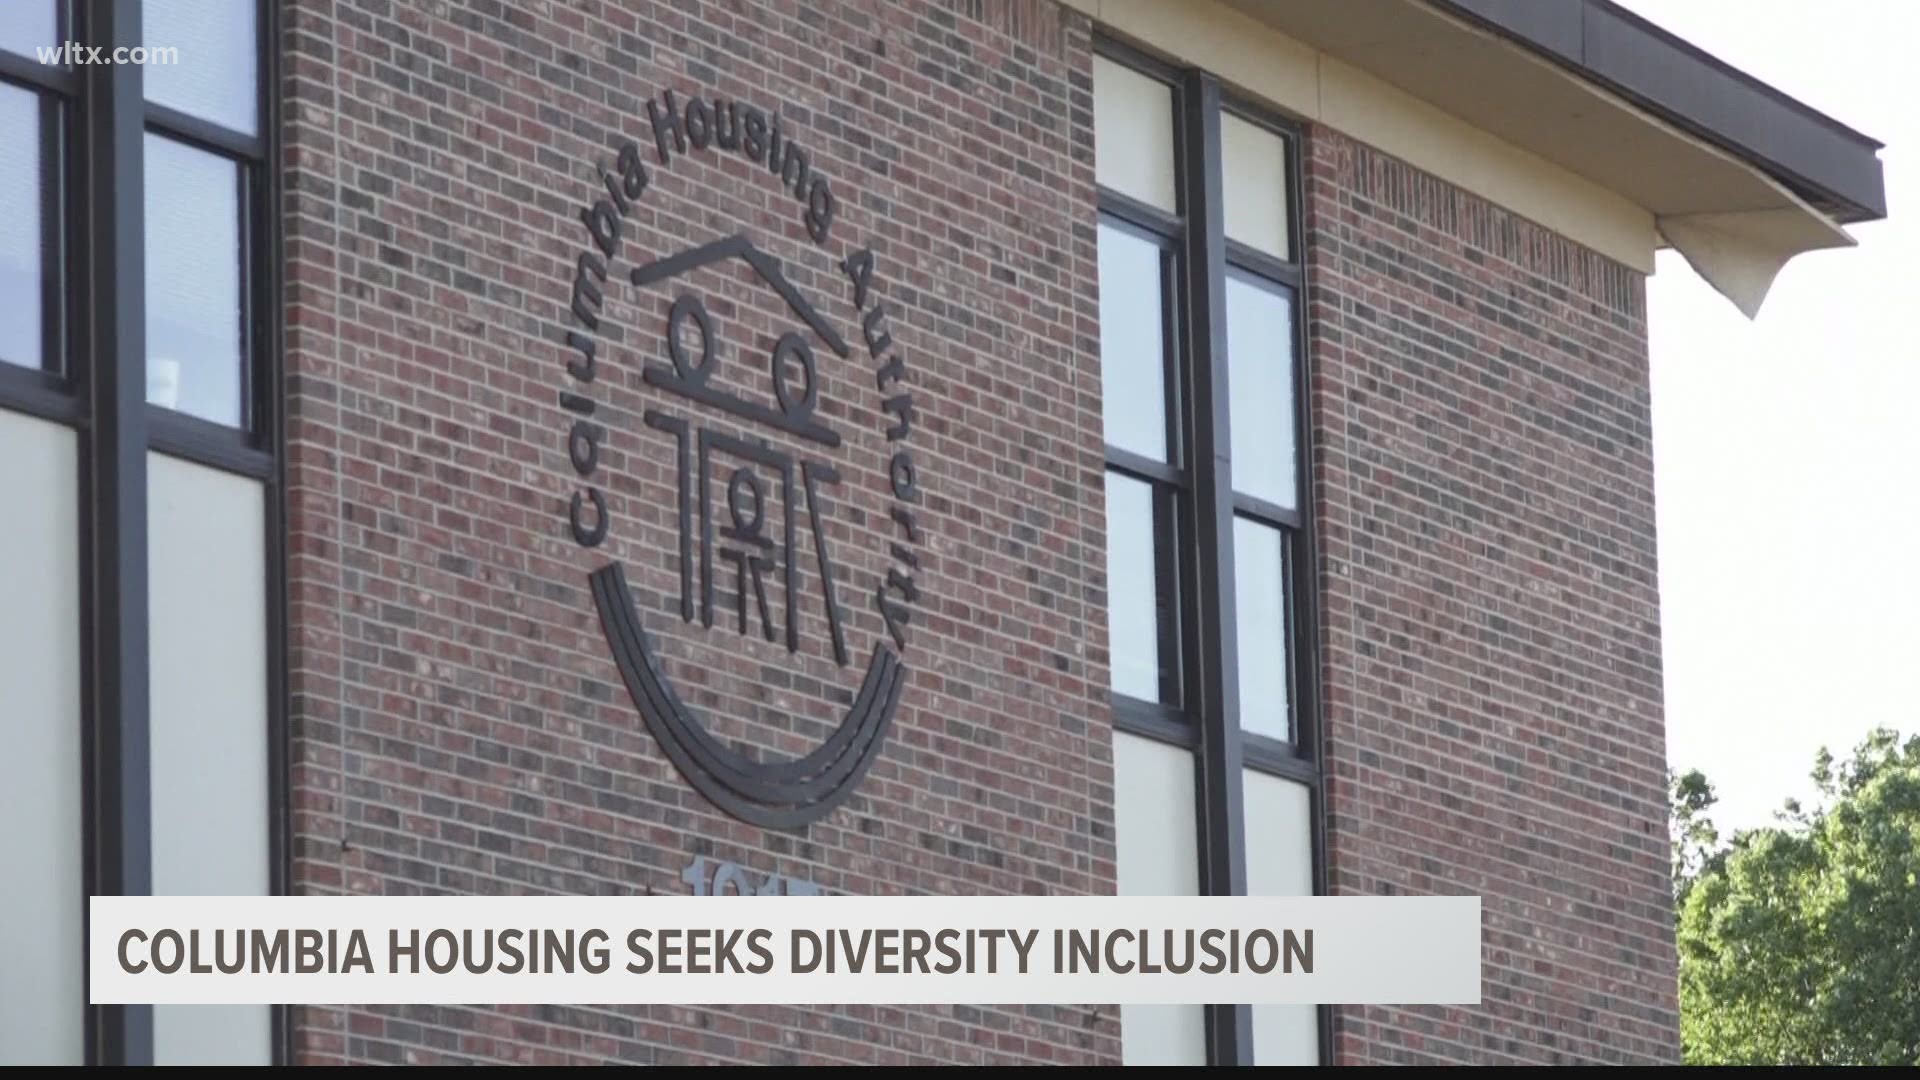 Columbia Housing is looking for diversity inclusion for construction on the former Gonzales' Gardens site.